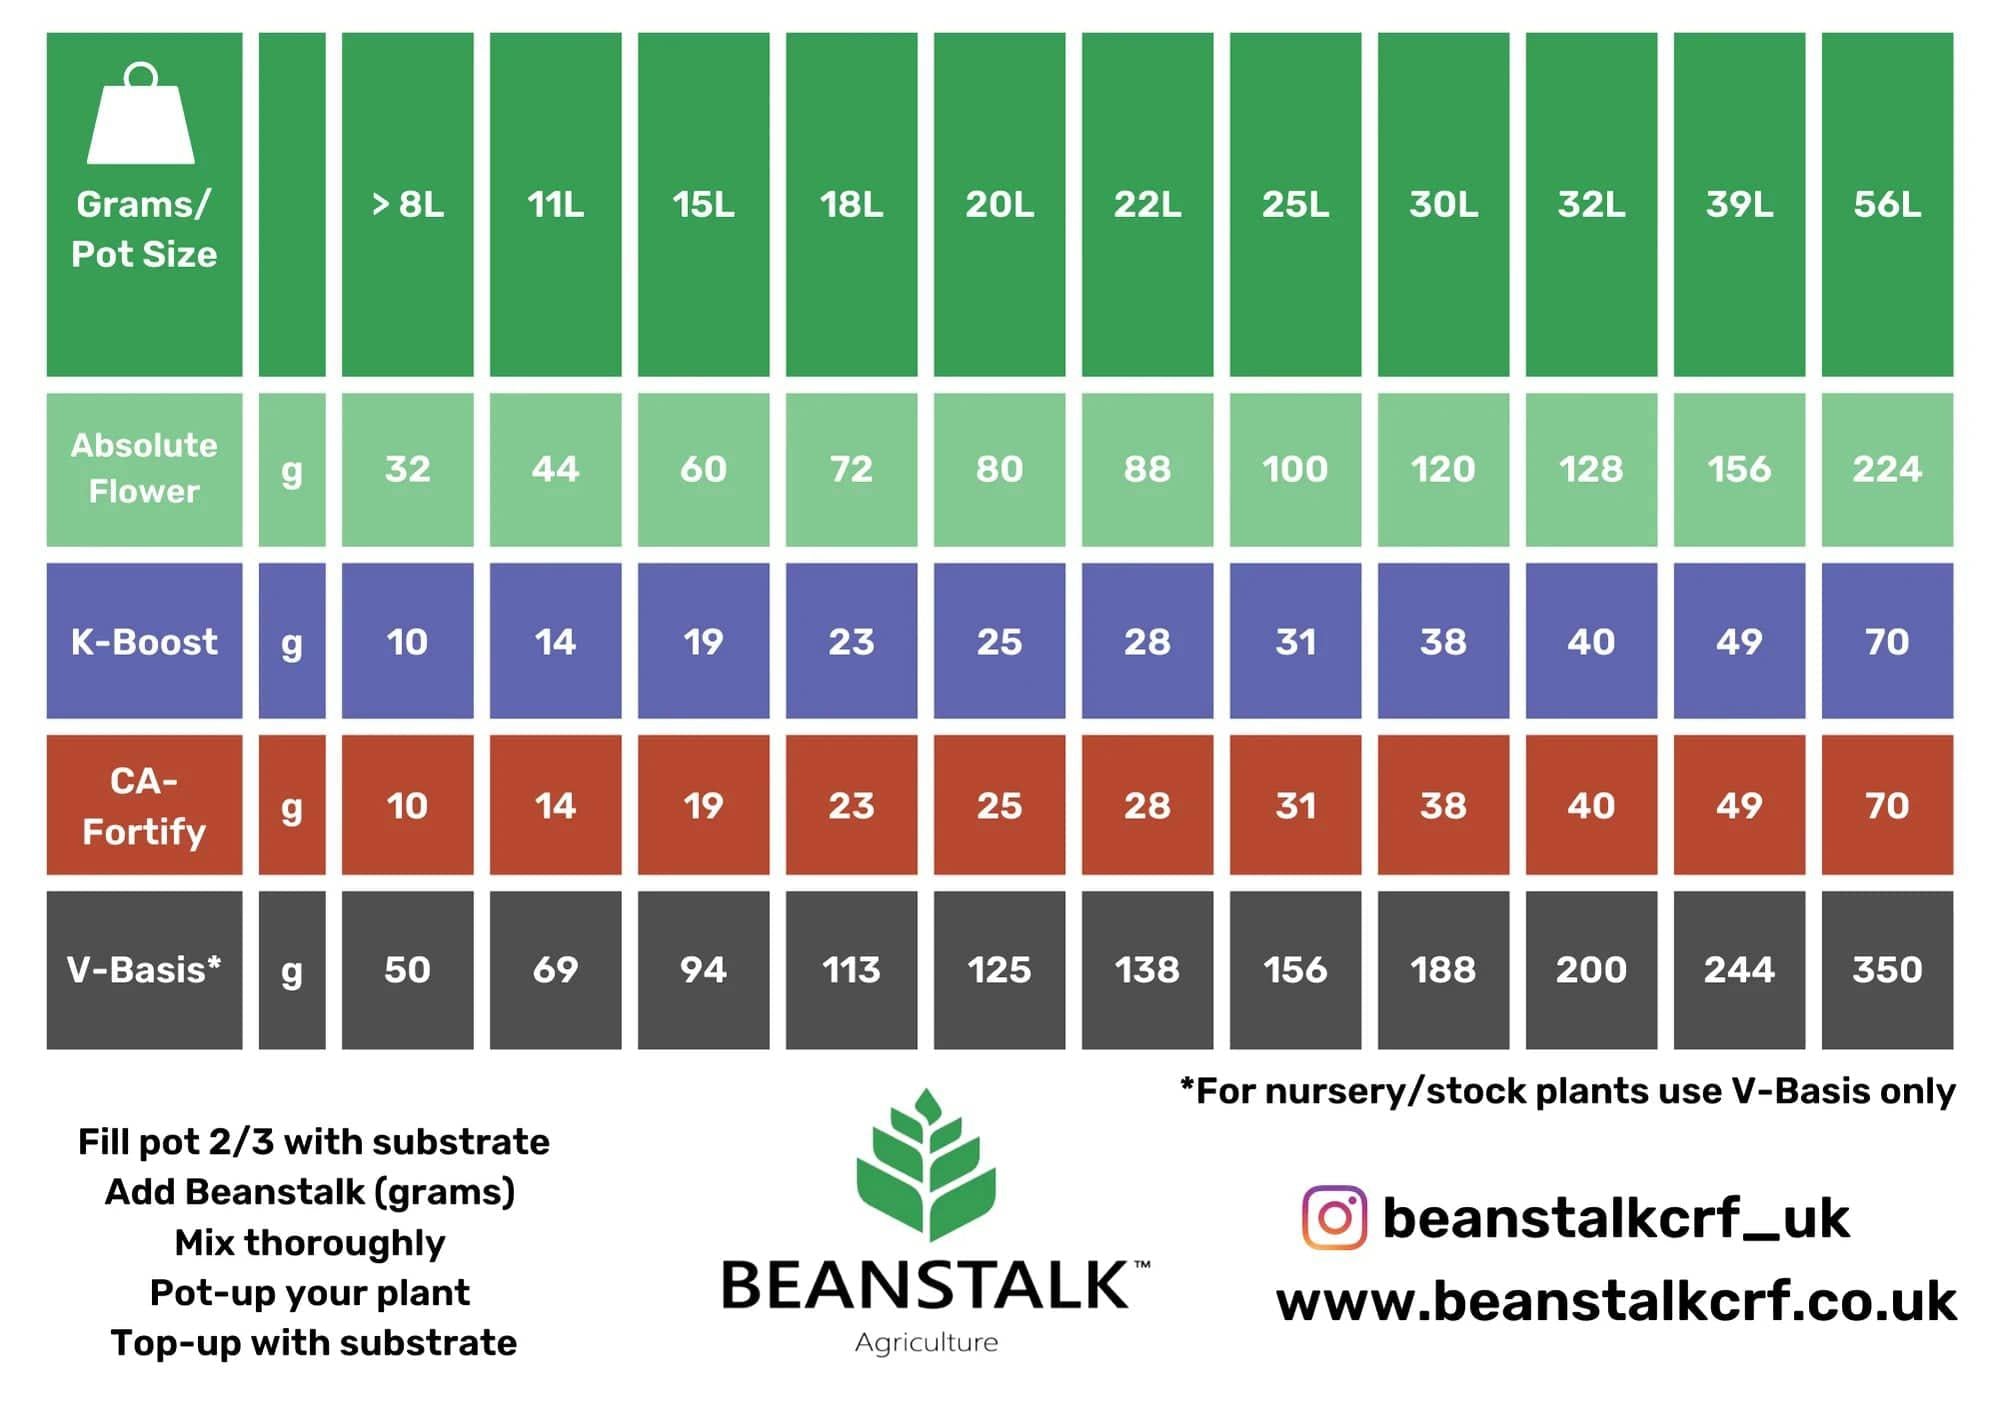 Nutrients Beanstalk - CA-Fortify (12-0-0) CalMag Additive